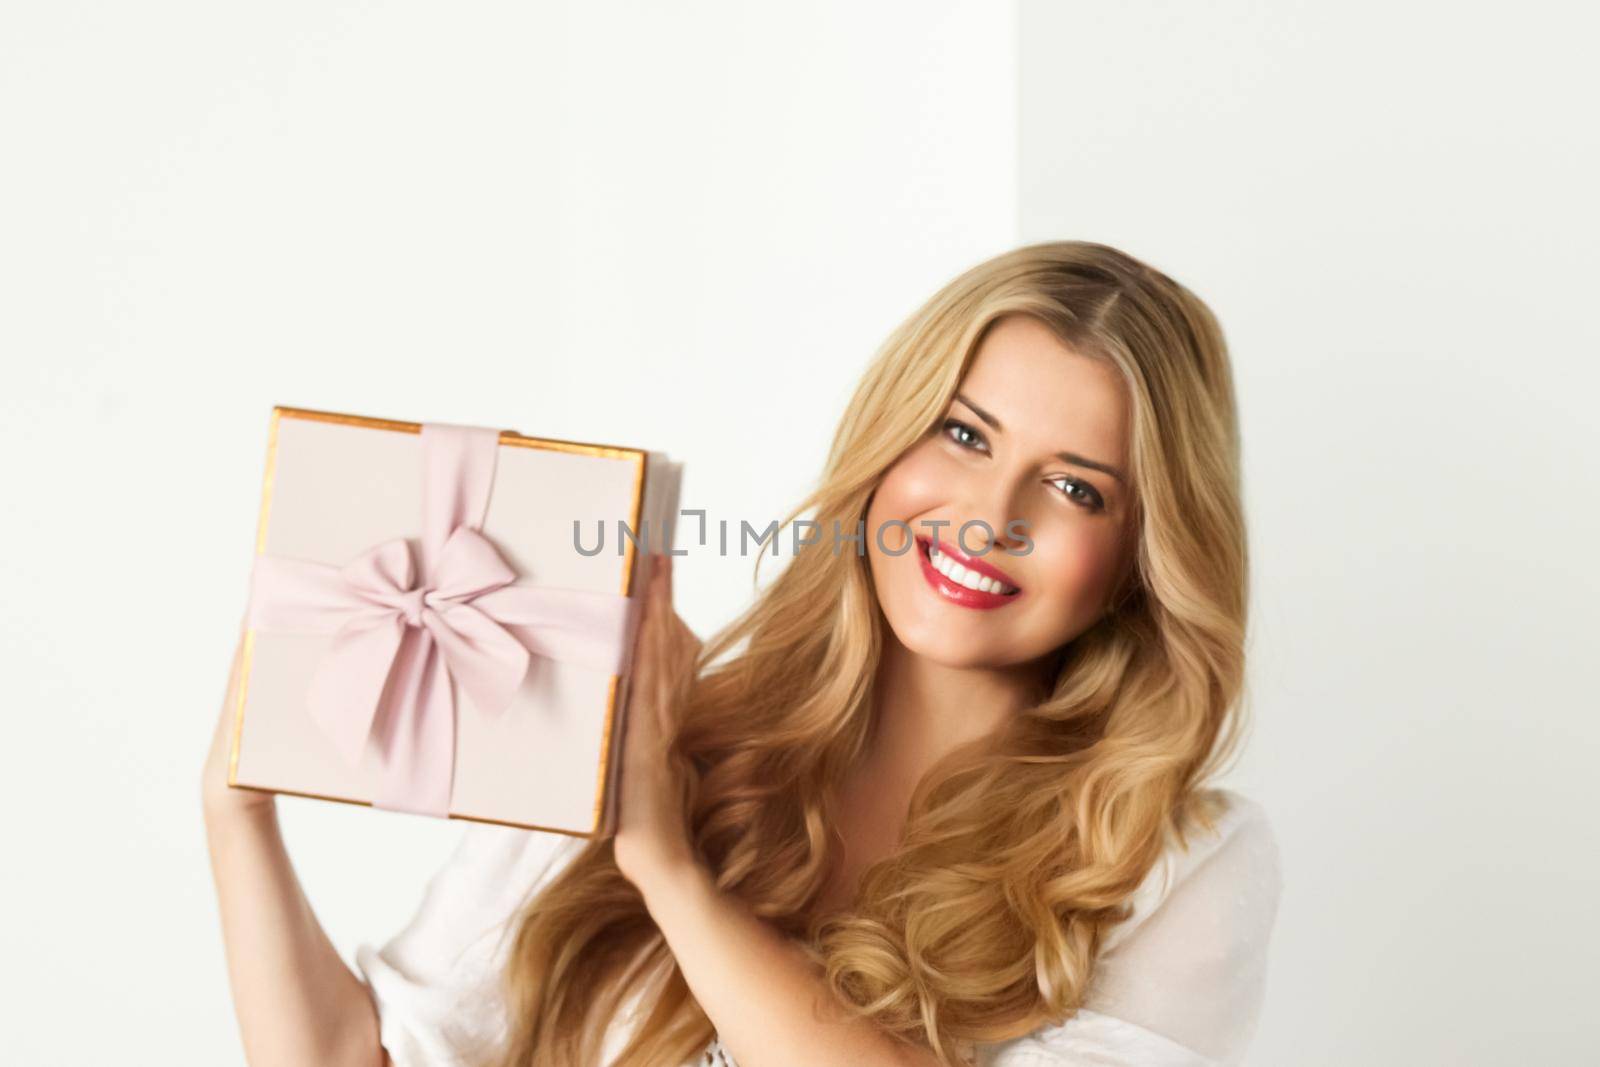 Happy woman holding a gift for birthday, anniversary, wedding, Valentines day or Christmas, luxury holiday present or beauty box subscription delivery concept